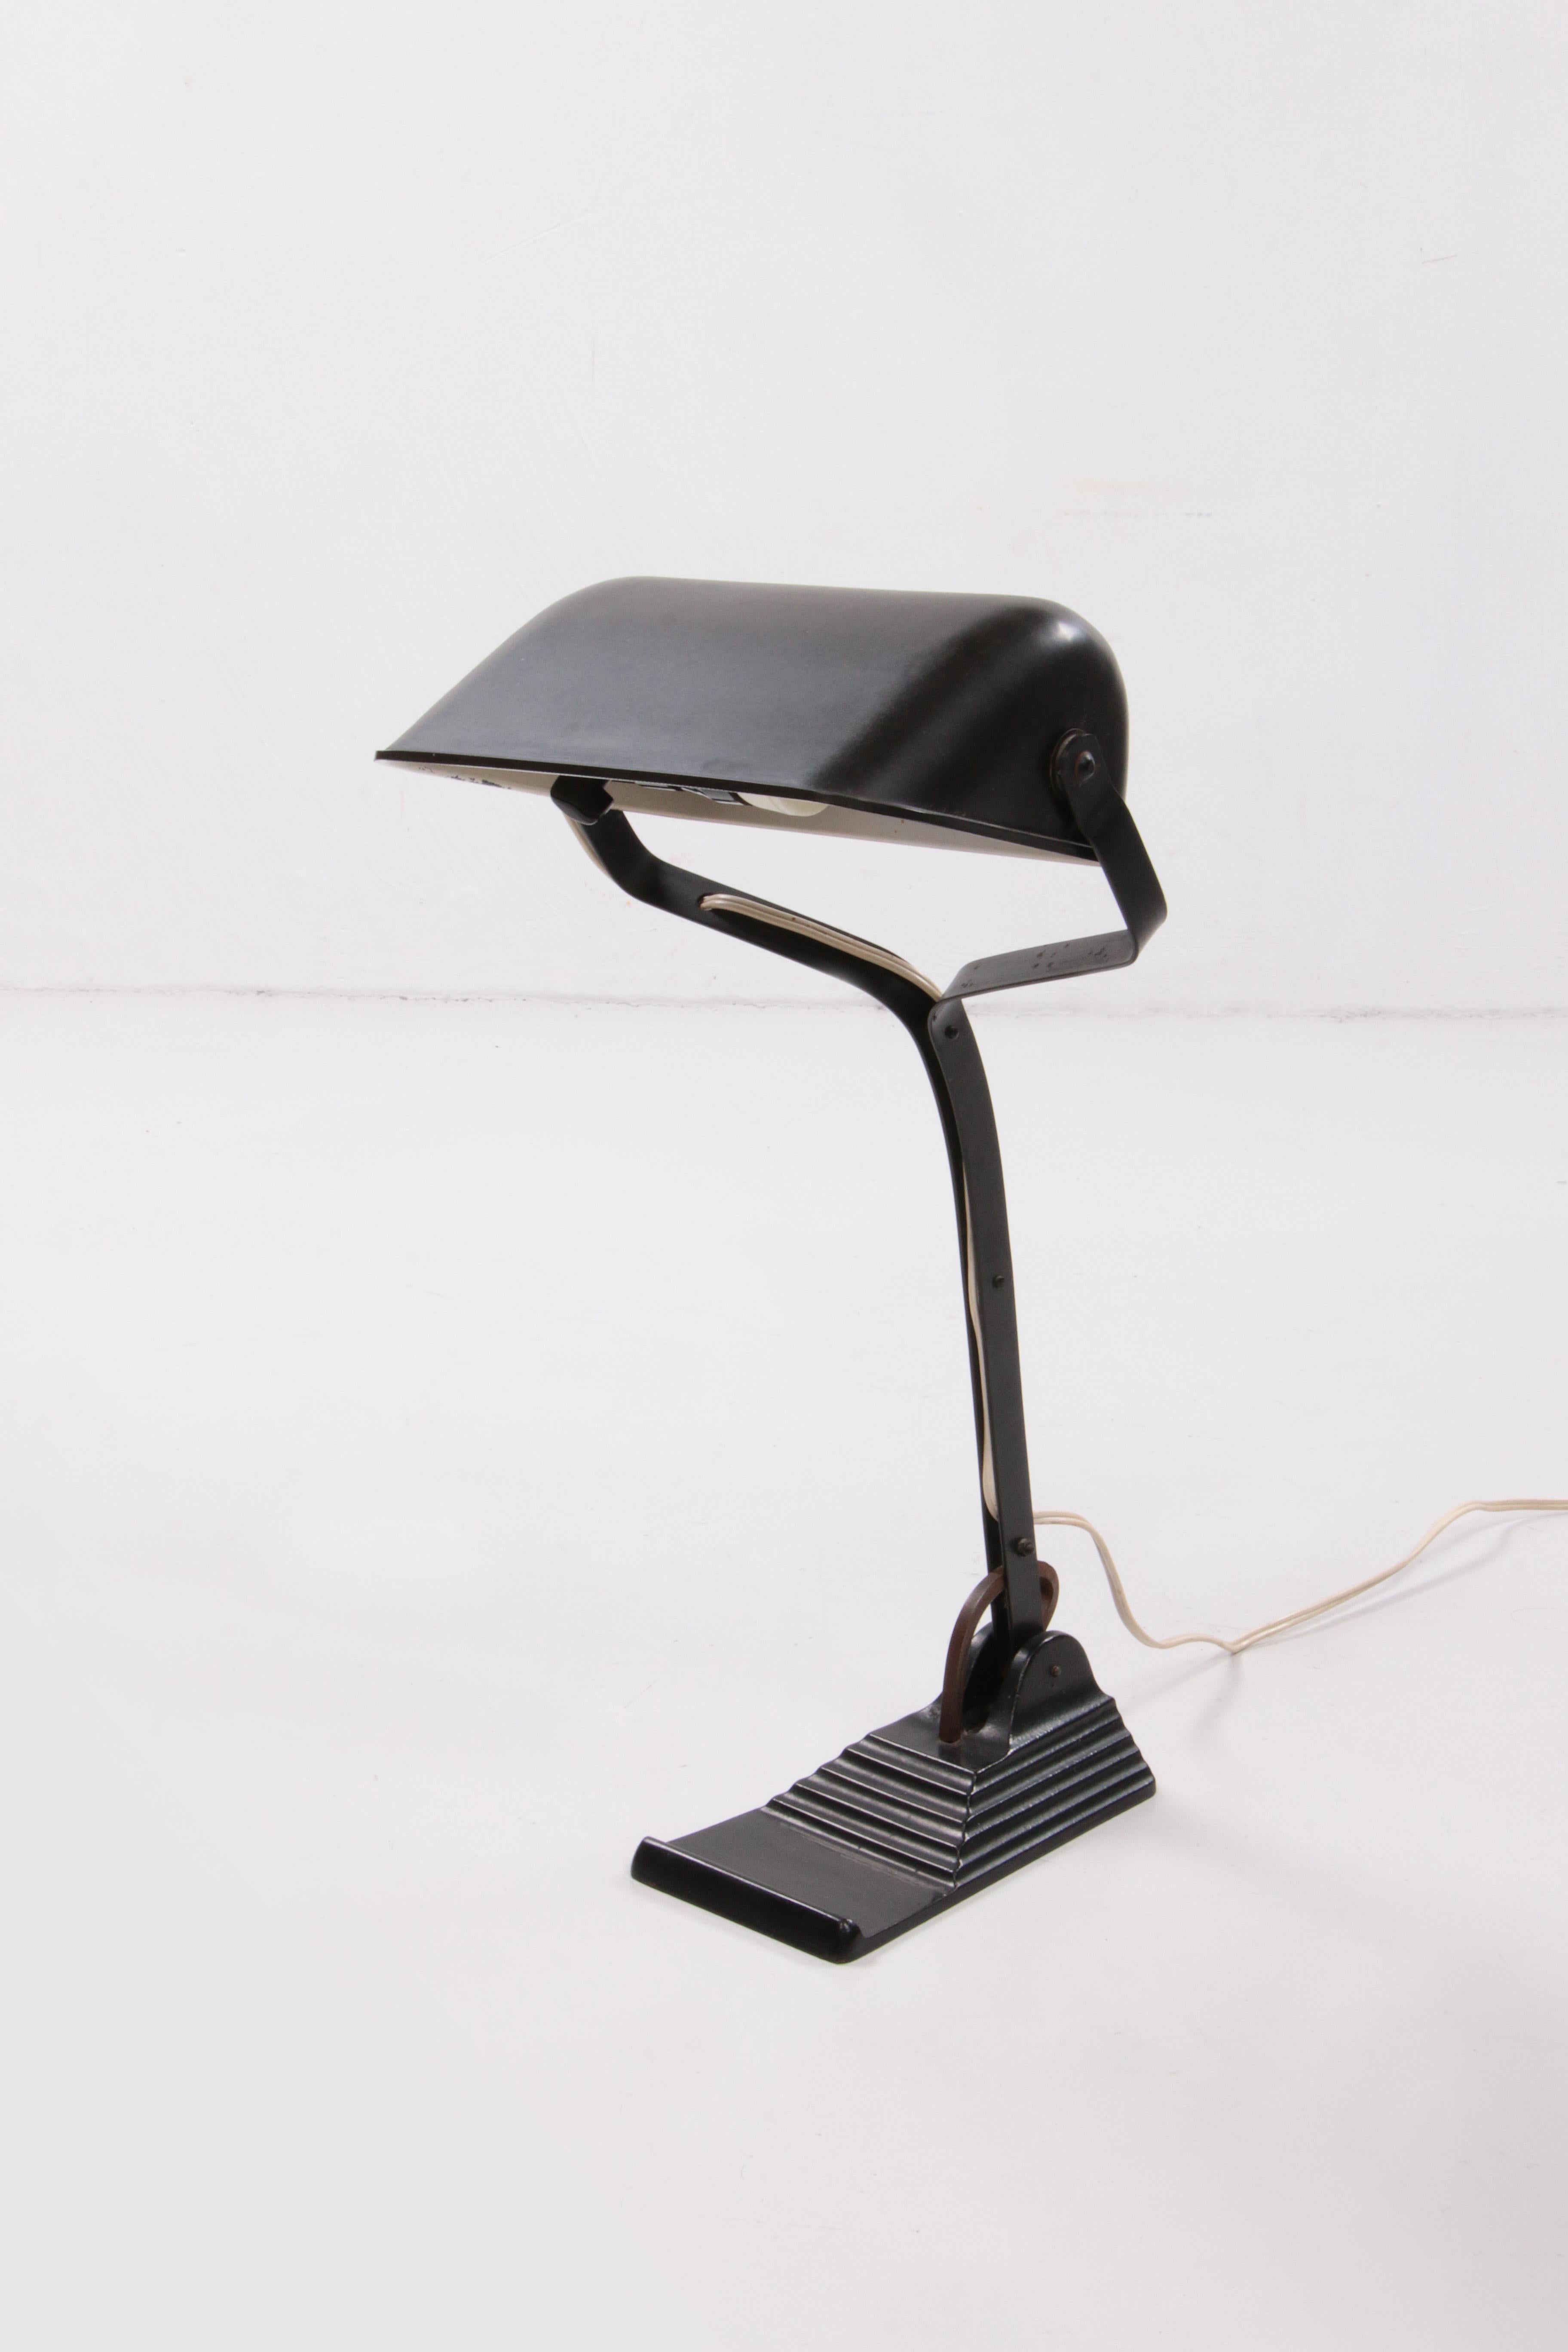 Art Deco desk lamp also called (notary lamp) made by Erpe Belgium.

Art Deco notary desk lamp with adjustable black enamel shade and cast iron base.

Marked in the hood: Erpé made in Belgium

Condition: works well and a pearl in front of your eye